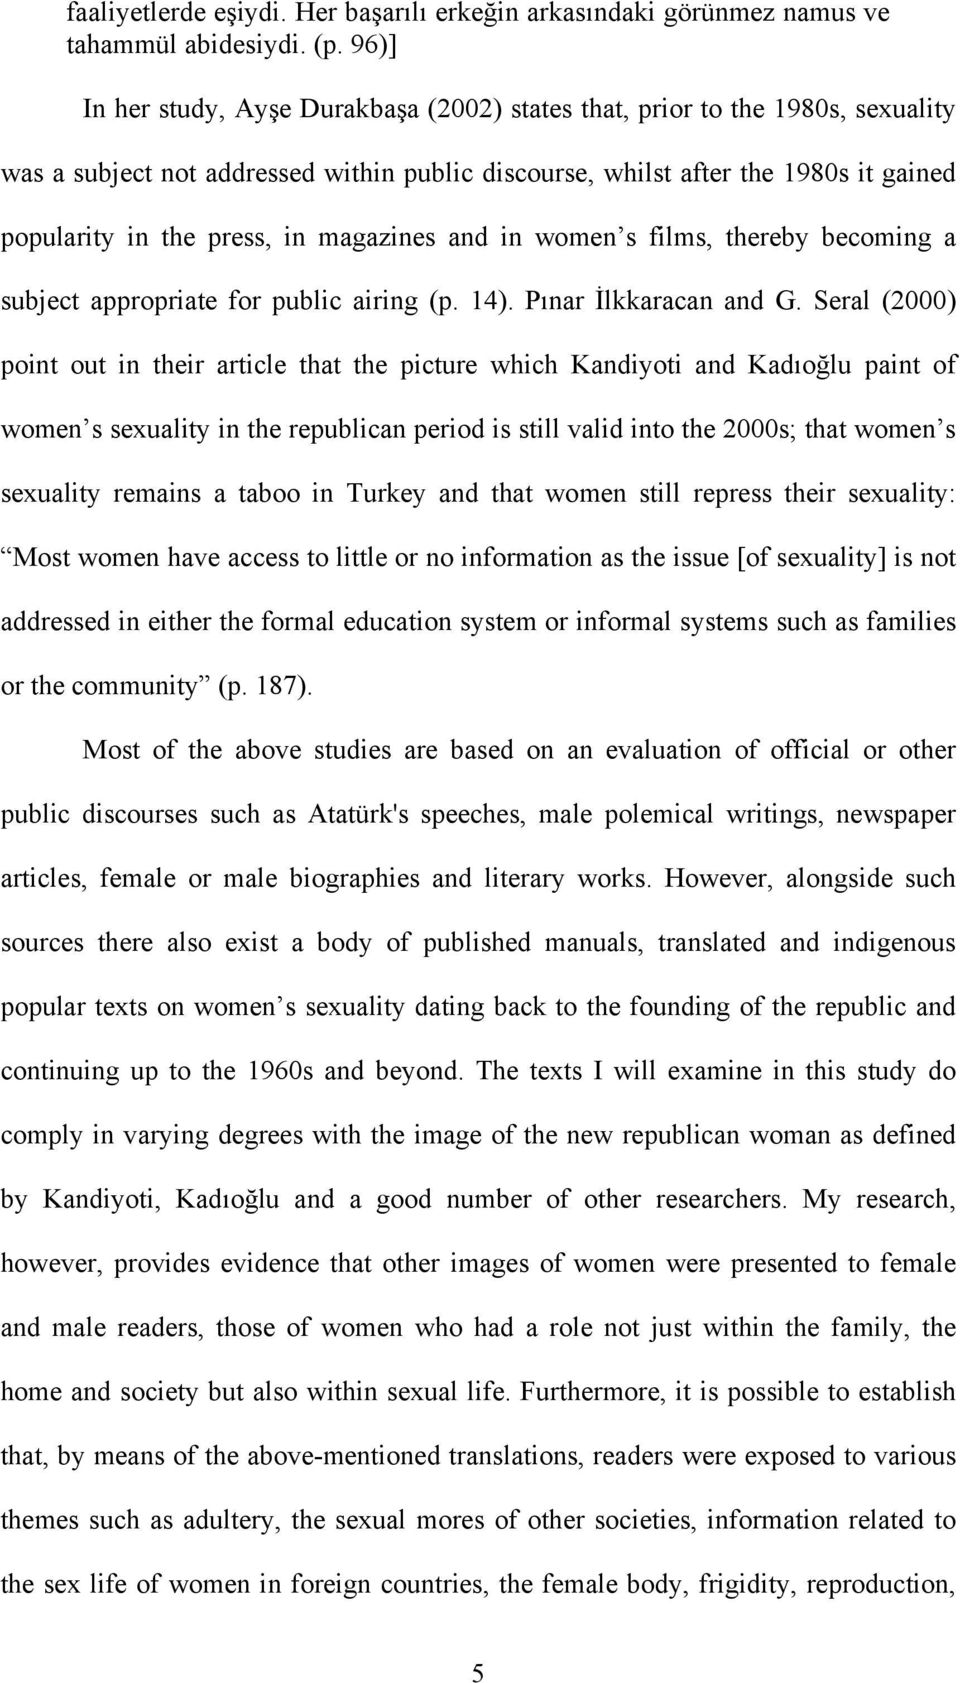 magazines and in women s films, thereby becoming a subject appropriate for public airing (p. 14). Pınar İlkkaracan and G.